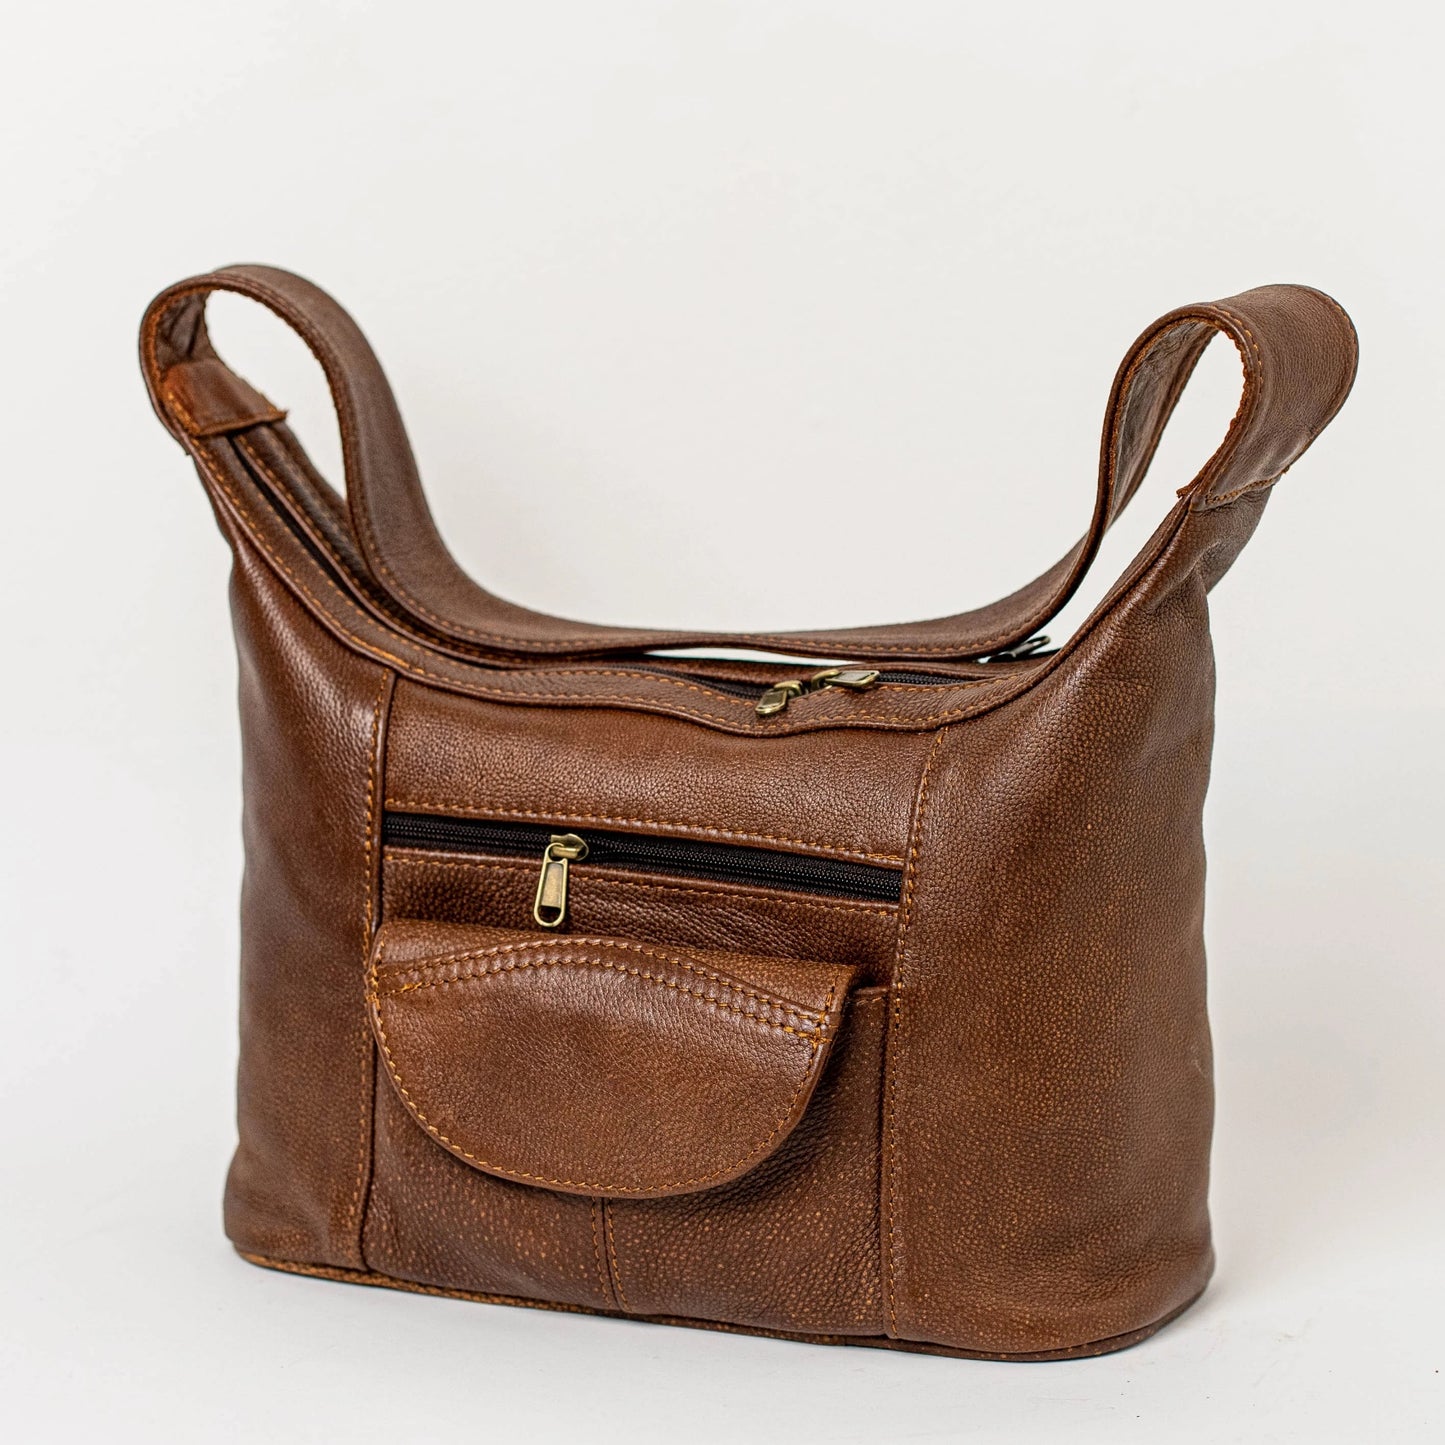 Gb7 leather bags with flap in bitter brown made by cape Masai Leather